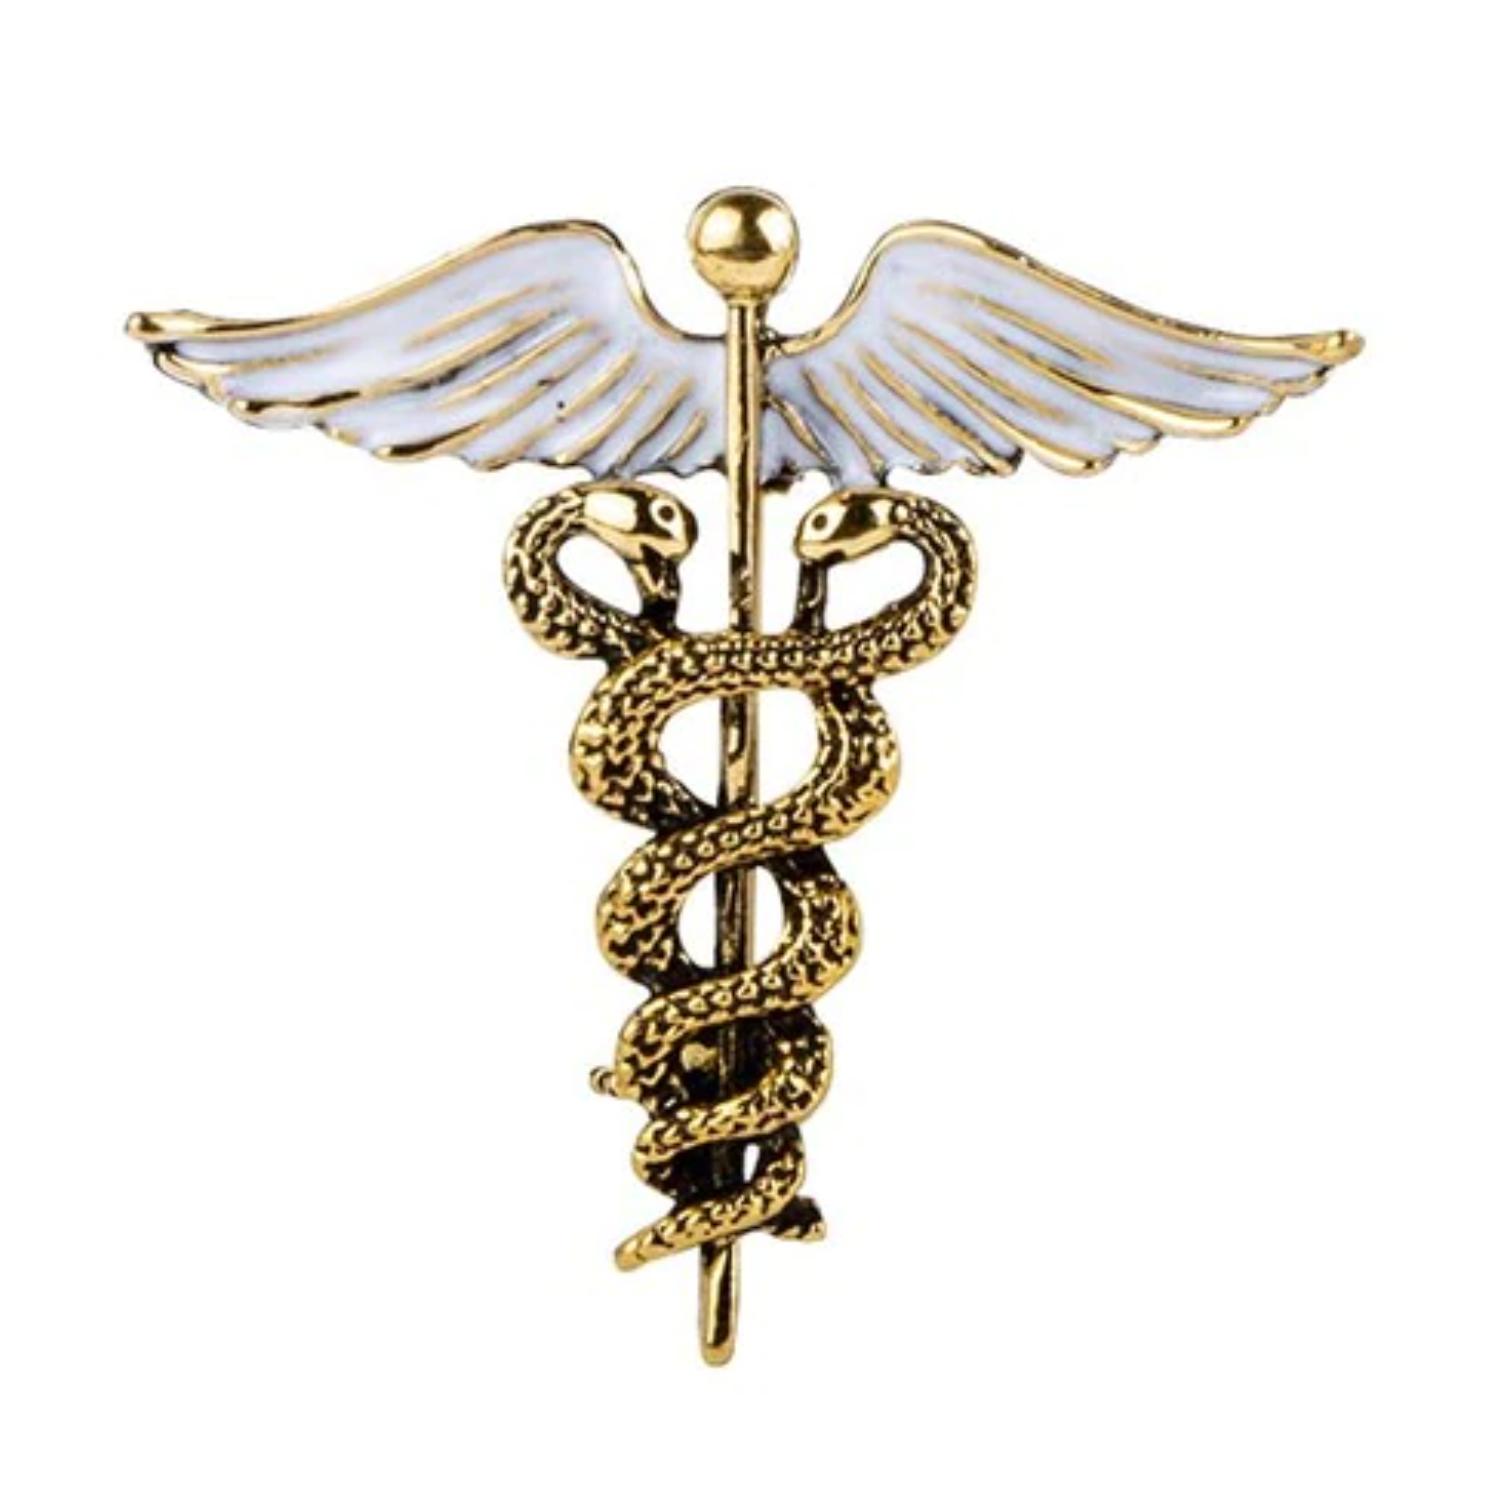 A Gold and Pearl Colored Caduceus Shaped Lapel Pin